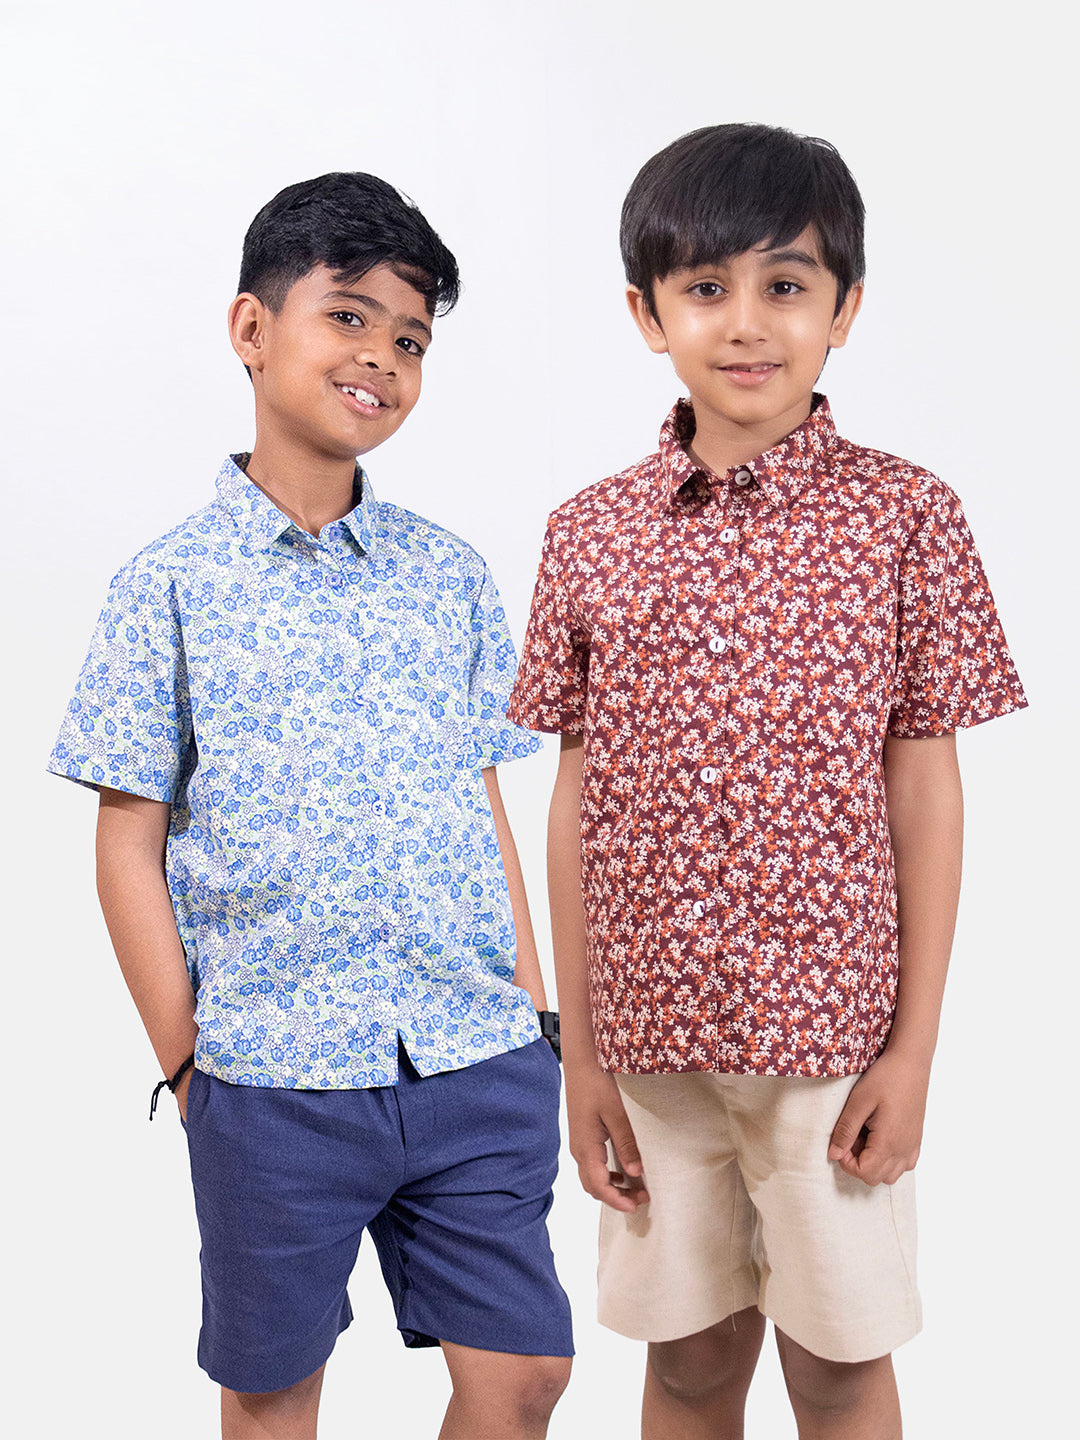 Boys Cotton Shirts Combo- Blue and Brown